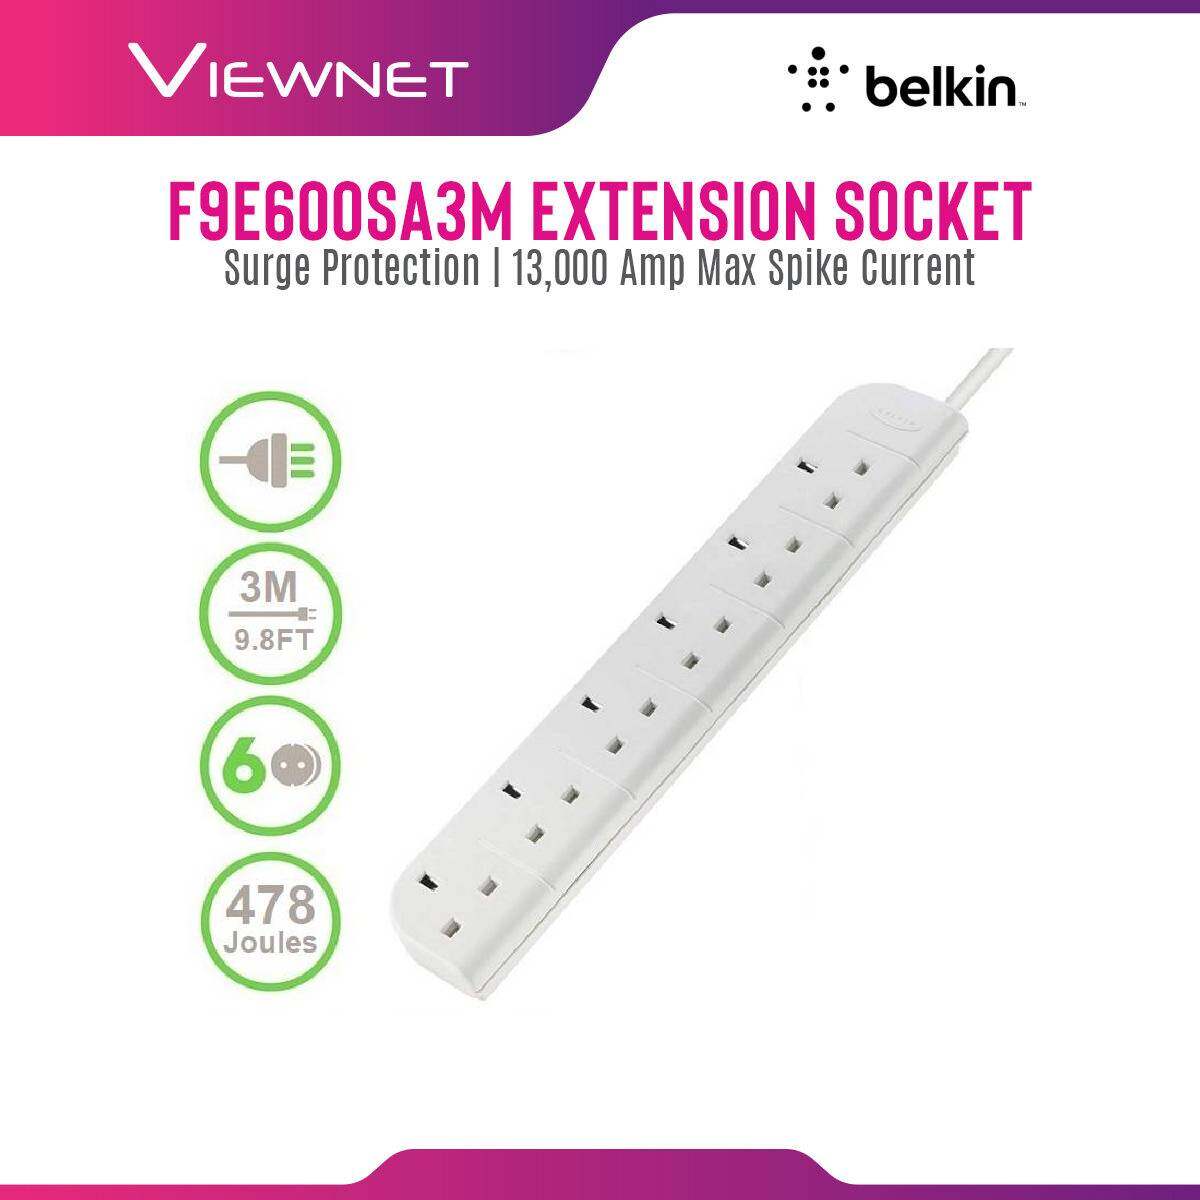 Belkin F9E600SA3M Extension Socket with Surge Protection , 13,000 Amp Max Spike Current